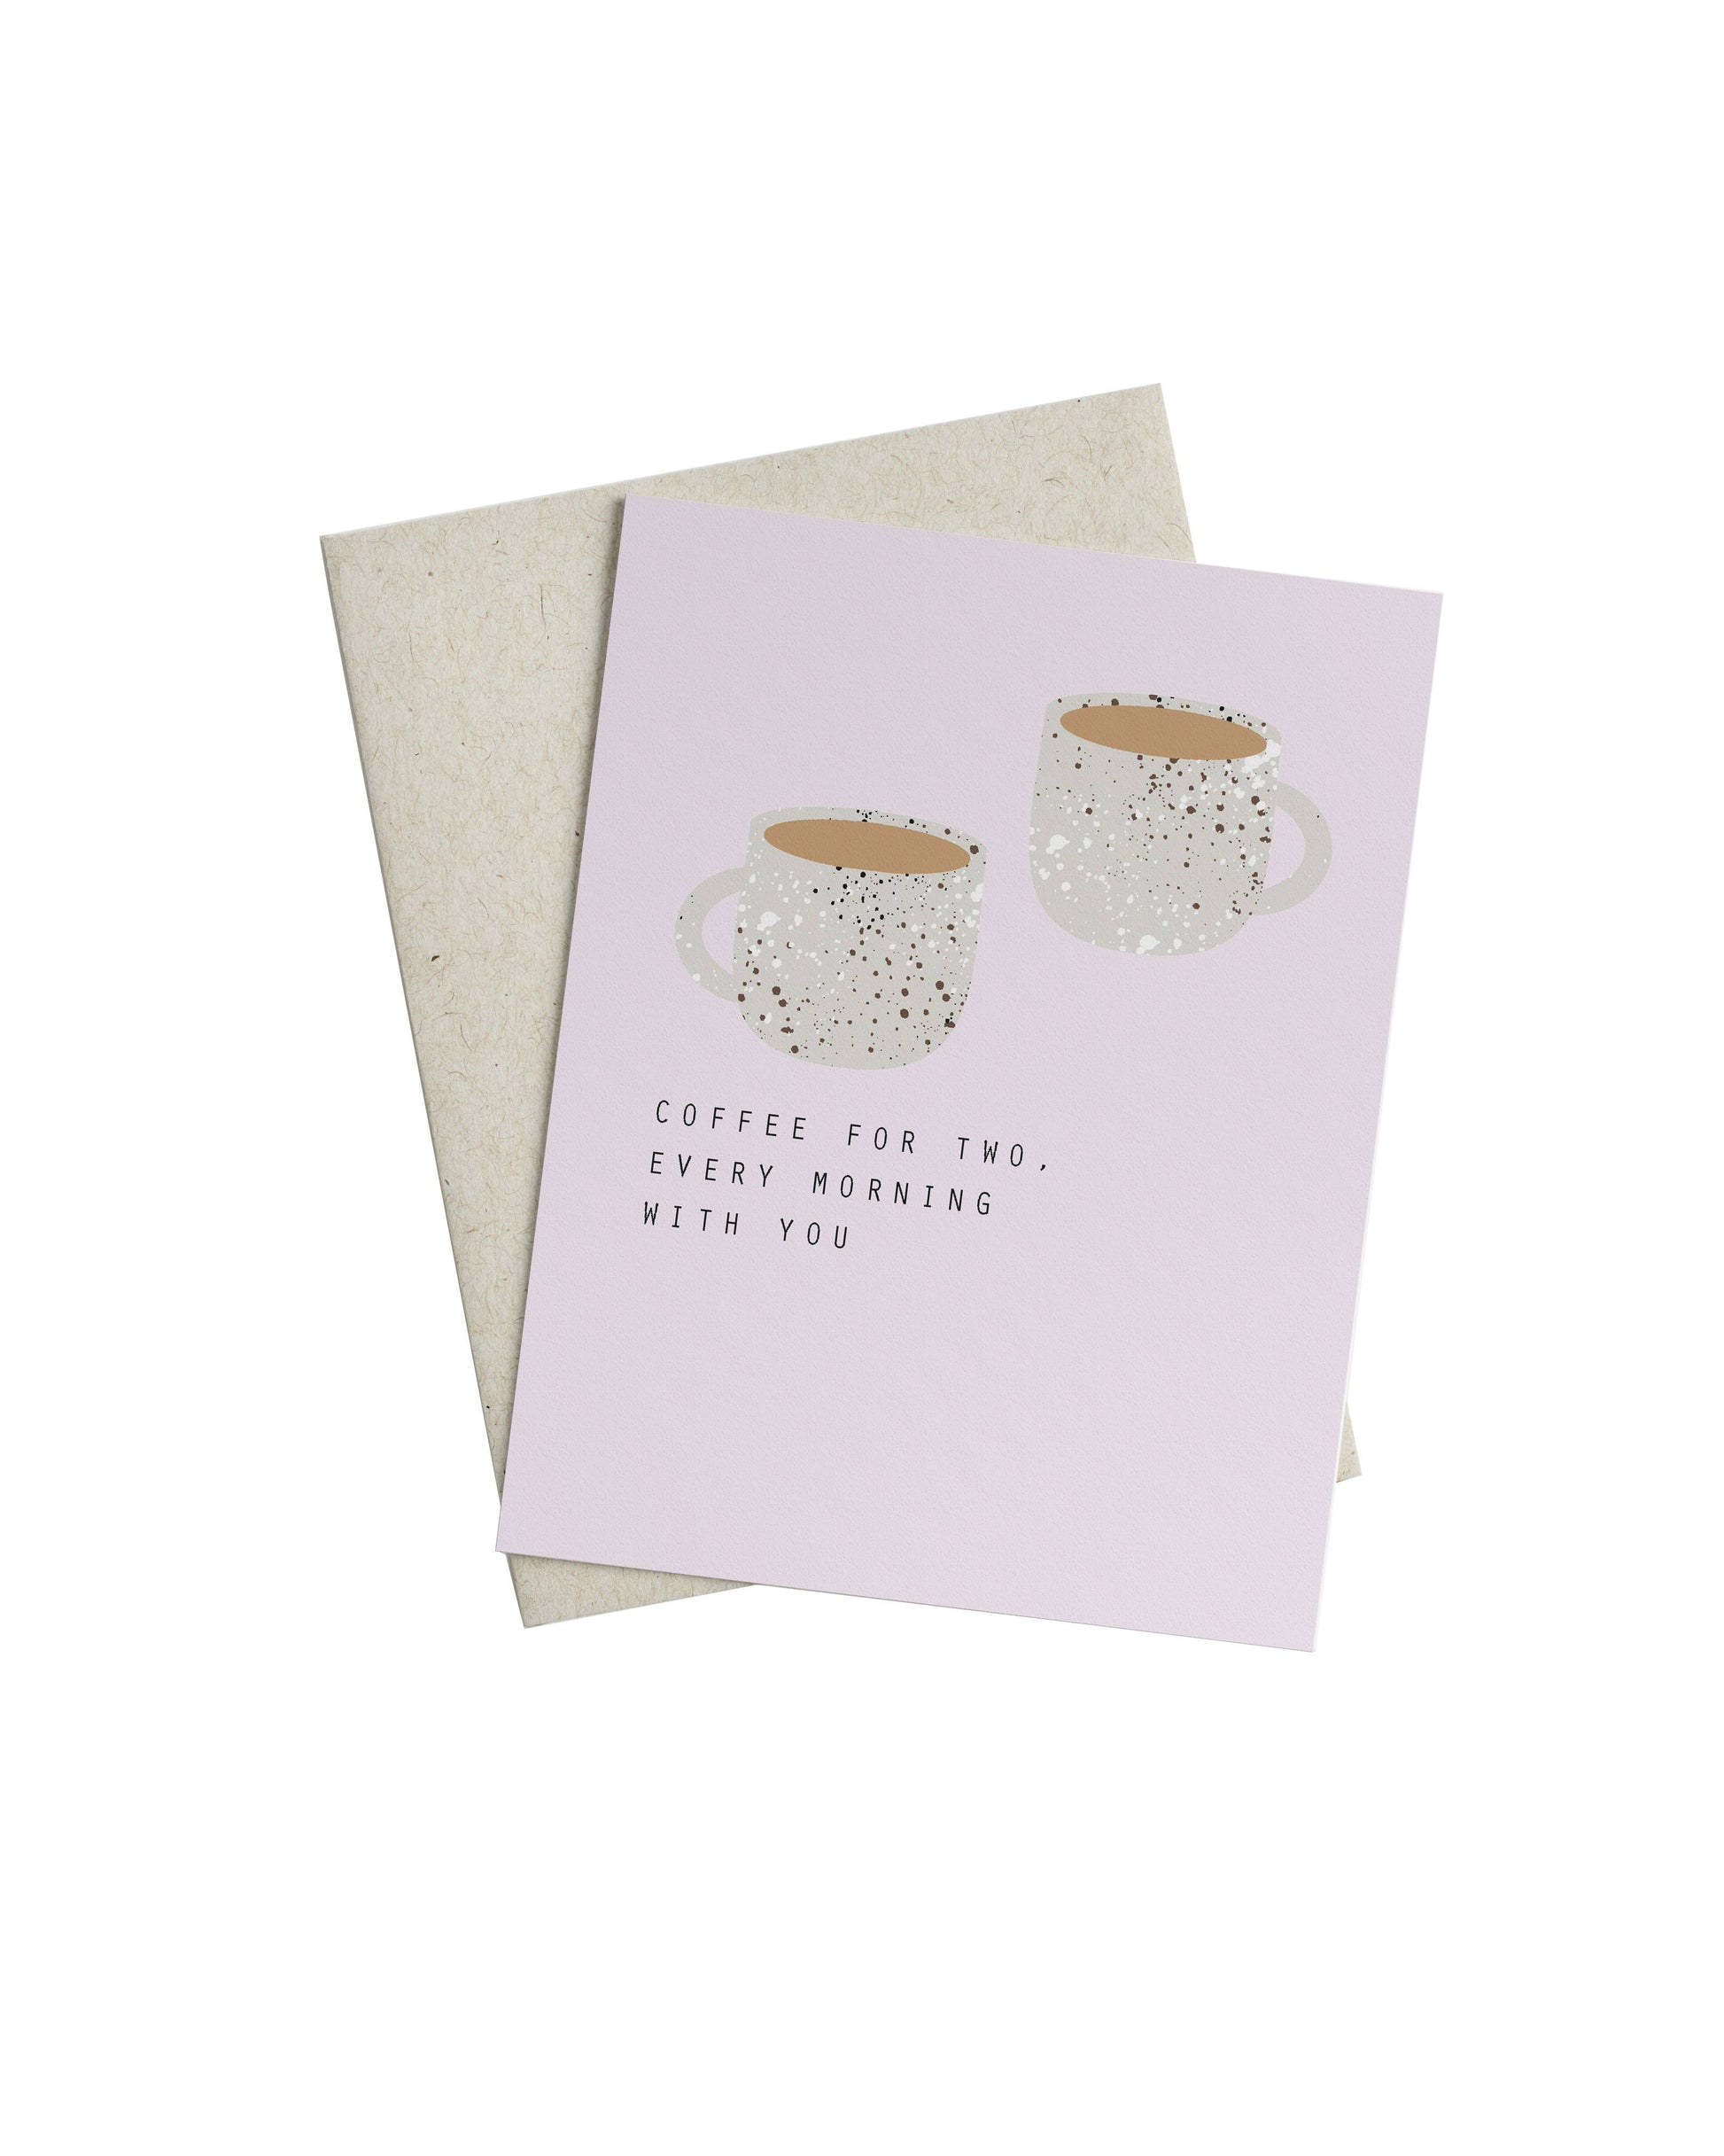 Card with two coffee mugs that says "Coffee for two. Every morning with you.